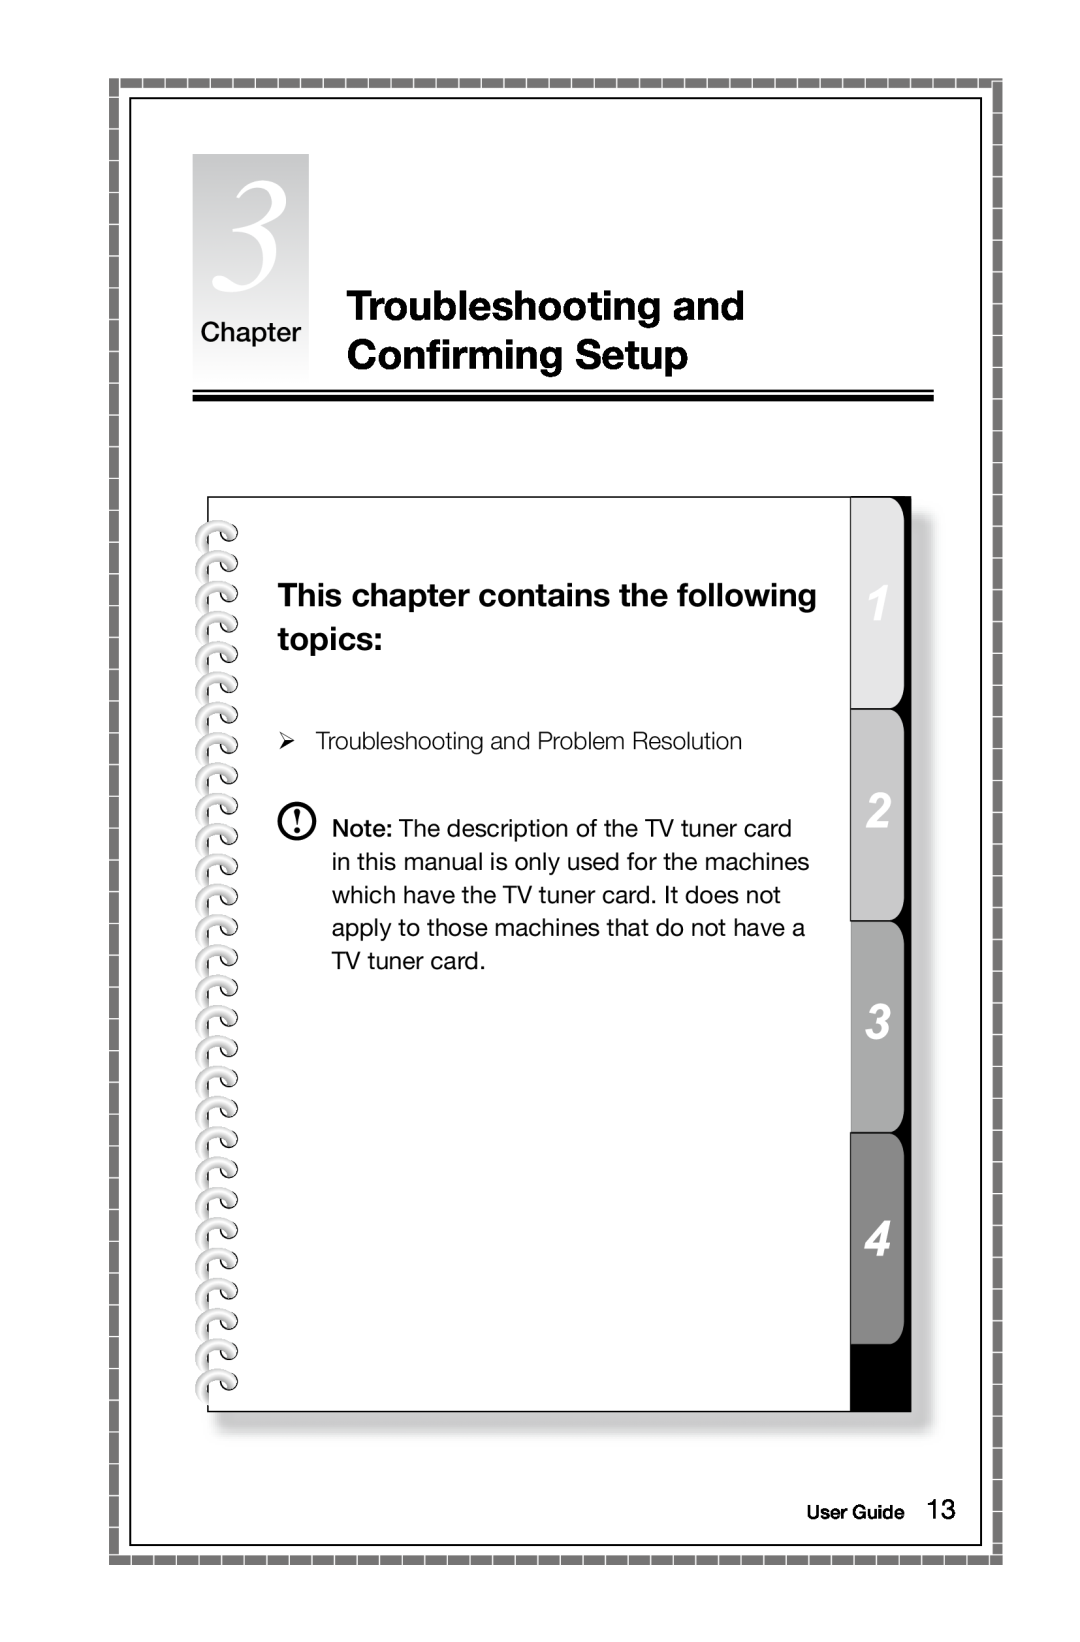 Lenovo H5S manual Troubleshooting and Chapter Confirming Setup, This chapter contains the following topics, User Guide 